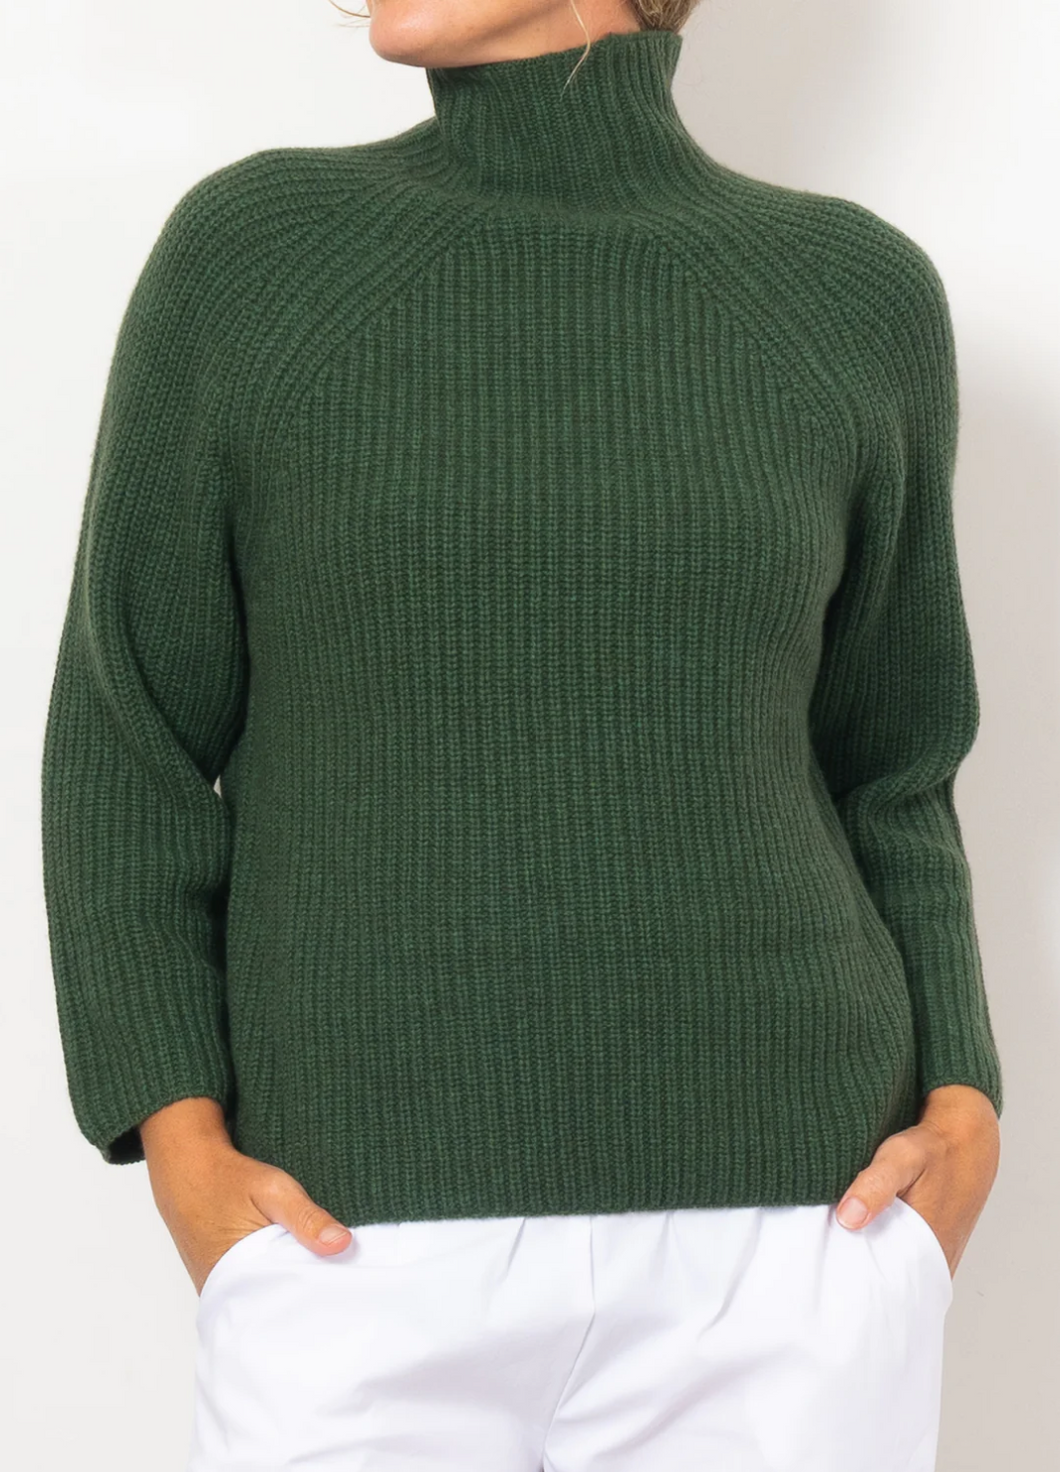 Luna Pullover in Forest by Mia Fratino